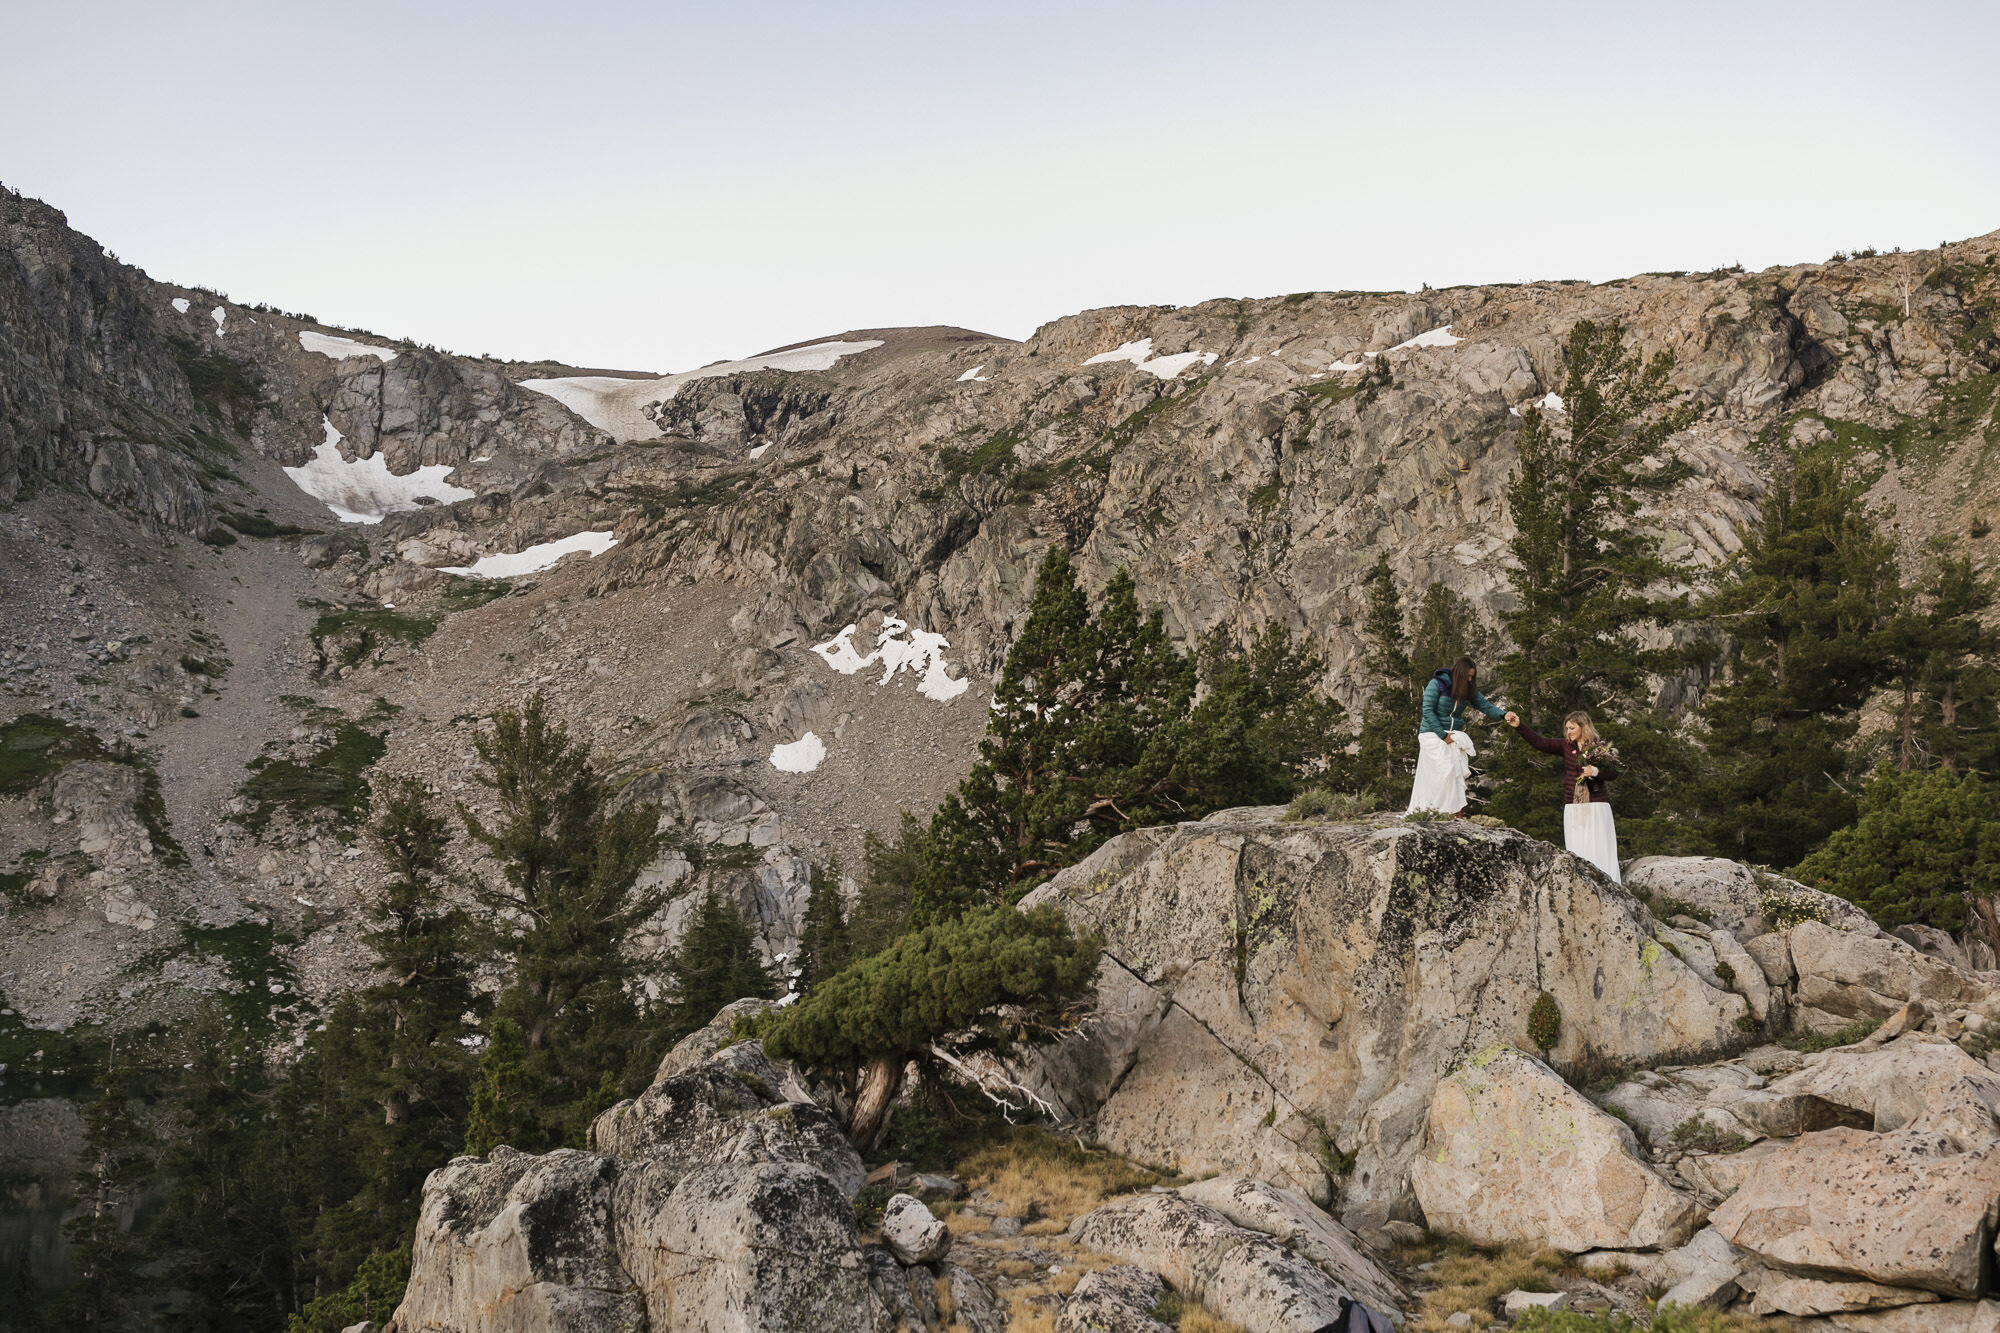 Wedding couple help each other over rocks in the Sierra Nevada mountains at sunrise during their backpacking elopement